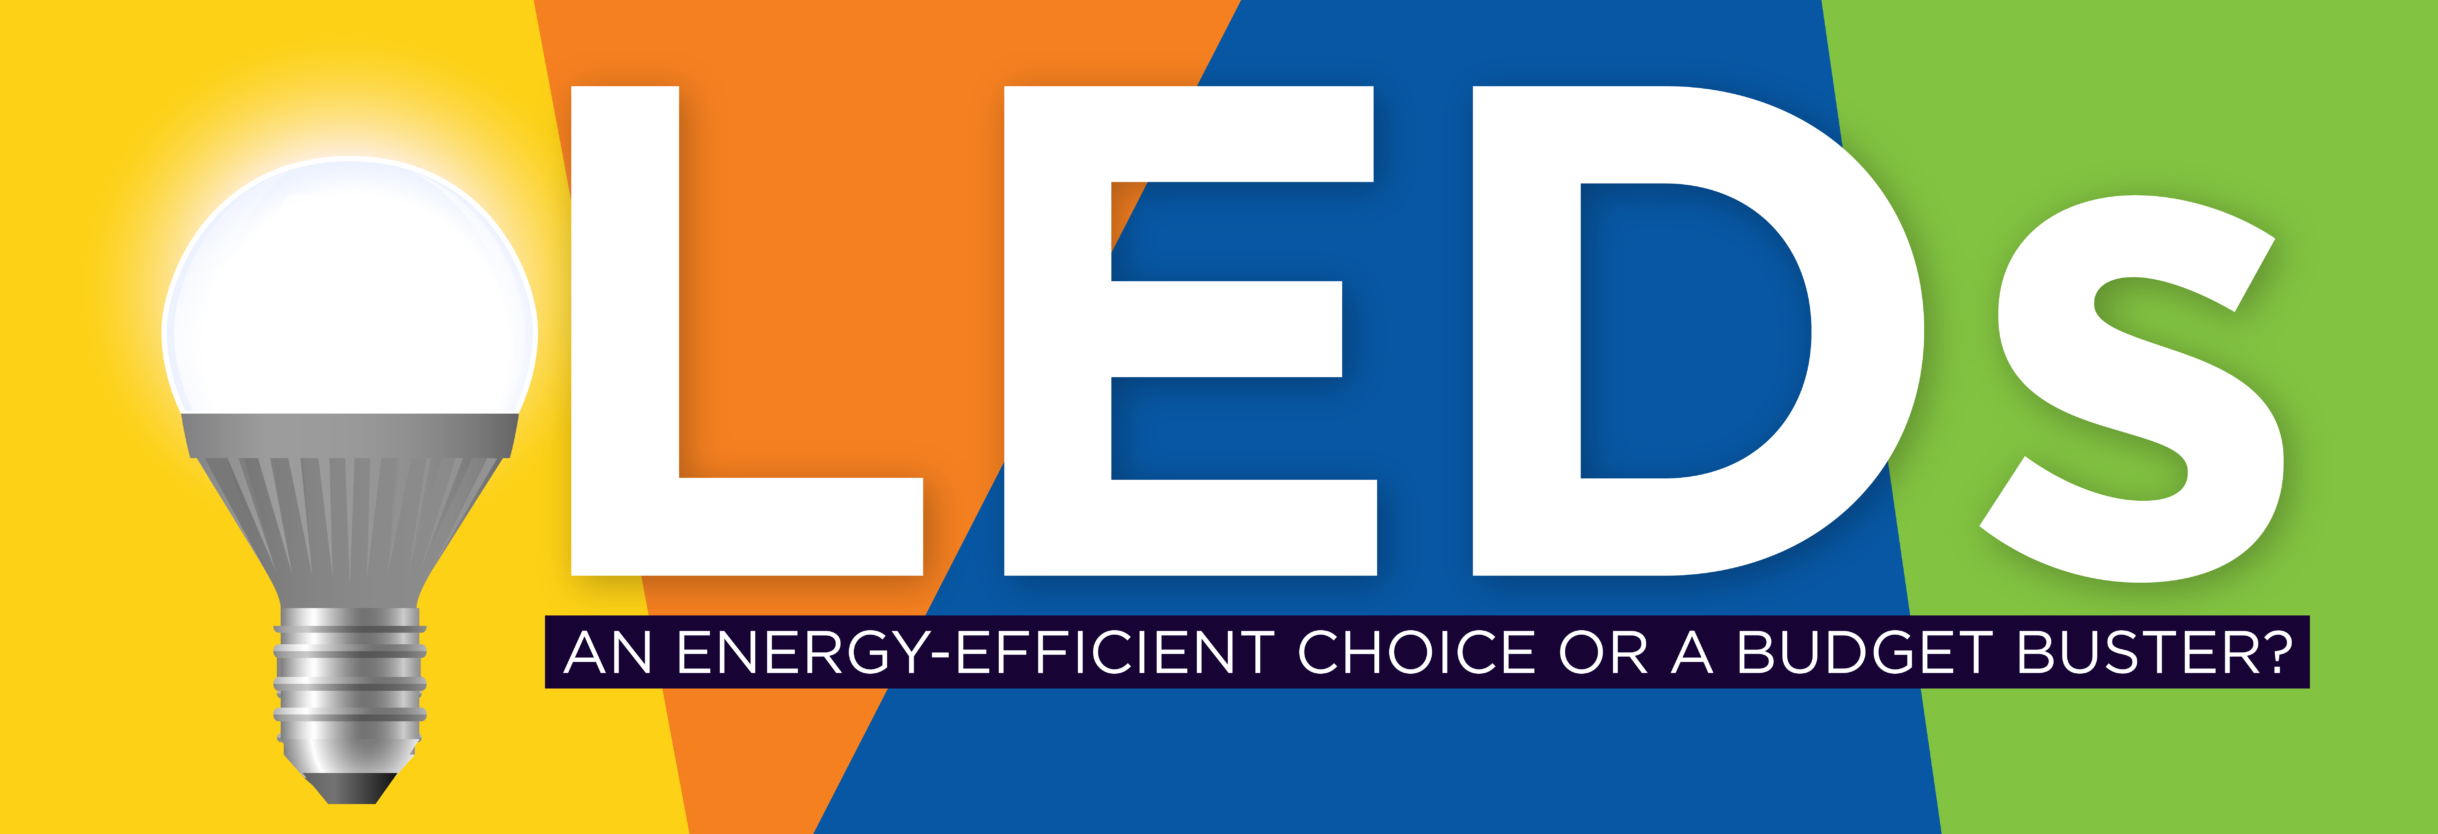 SECO News August 2020: LEDs An Energy-Efficient Choice or A Budget Buster?